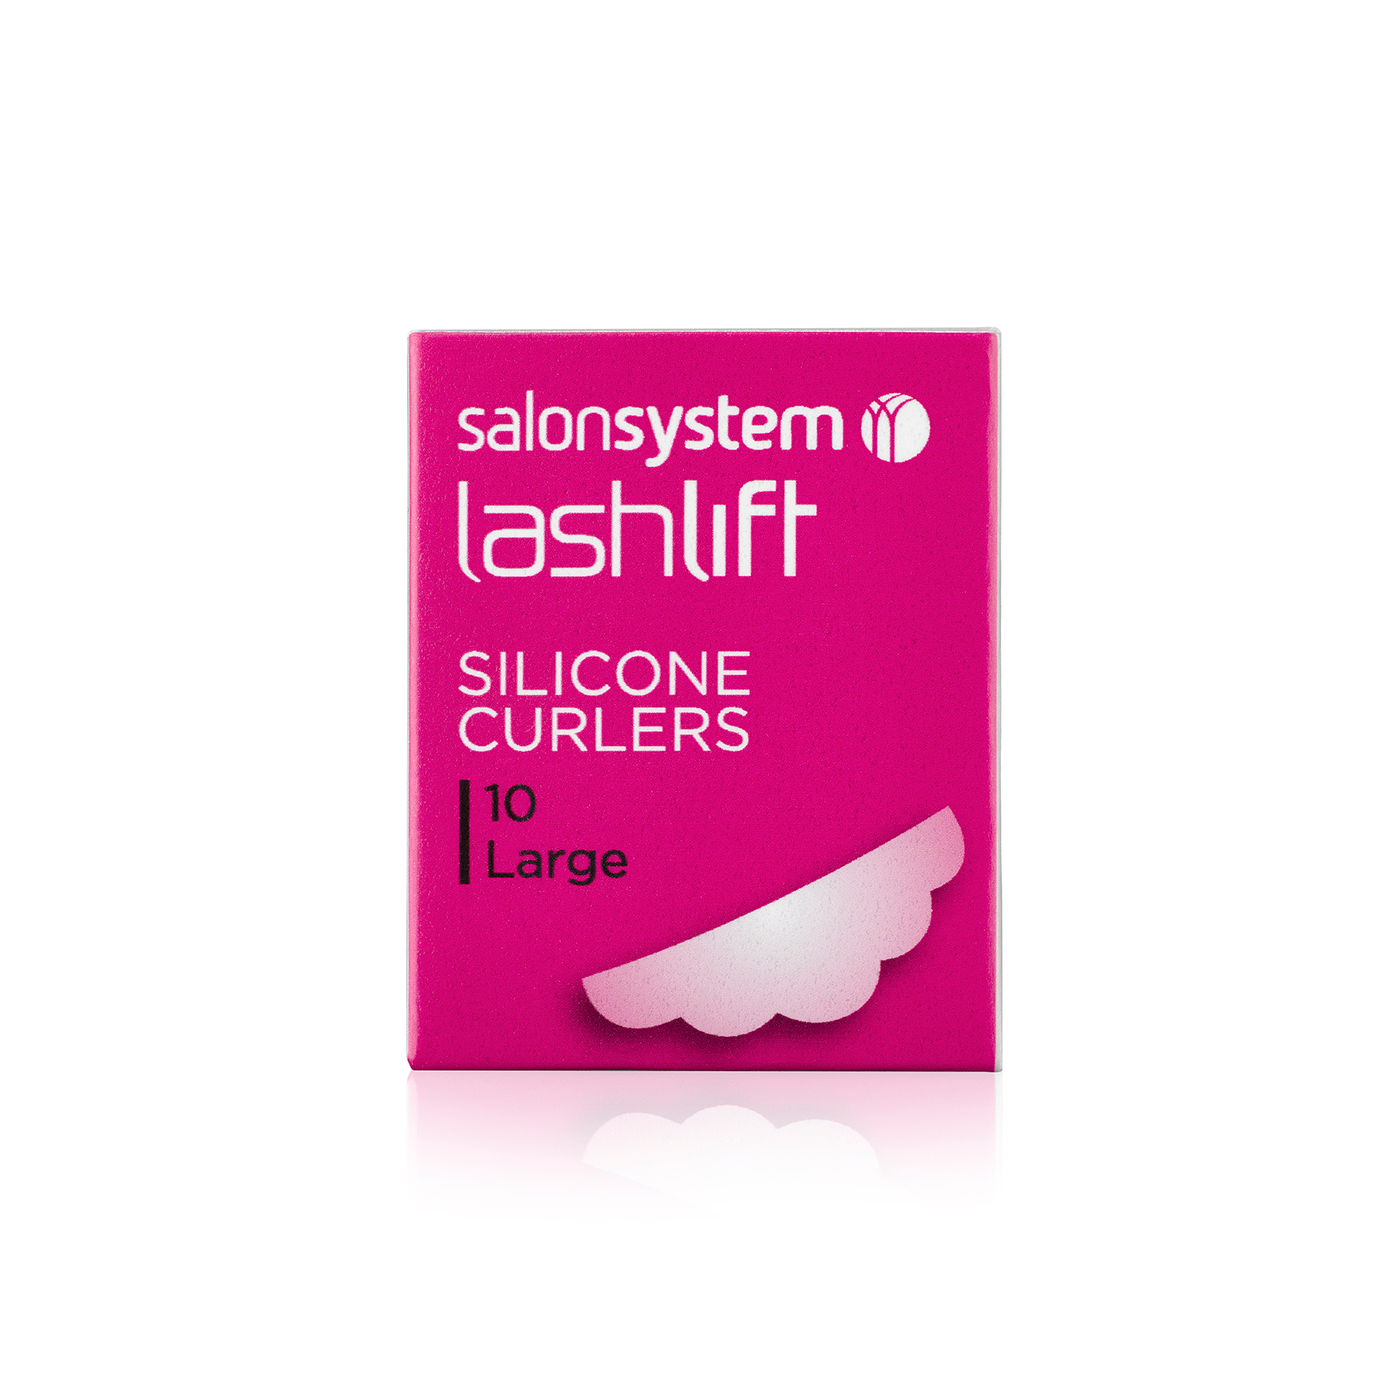 LashLift Silicone Curlers Large (10) - Ultimate Hair and Beauty